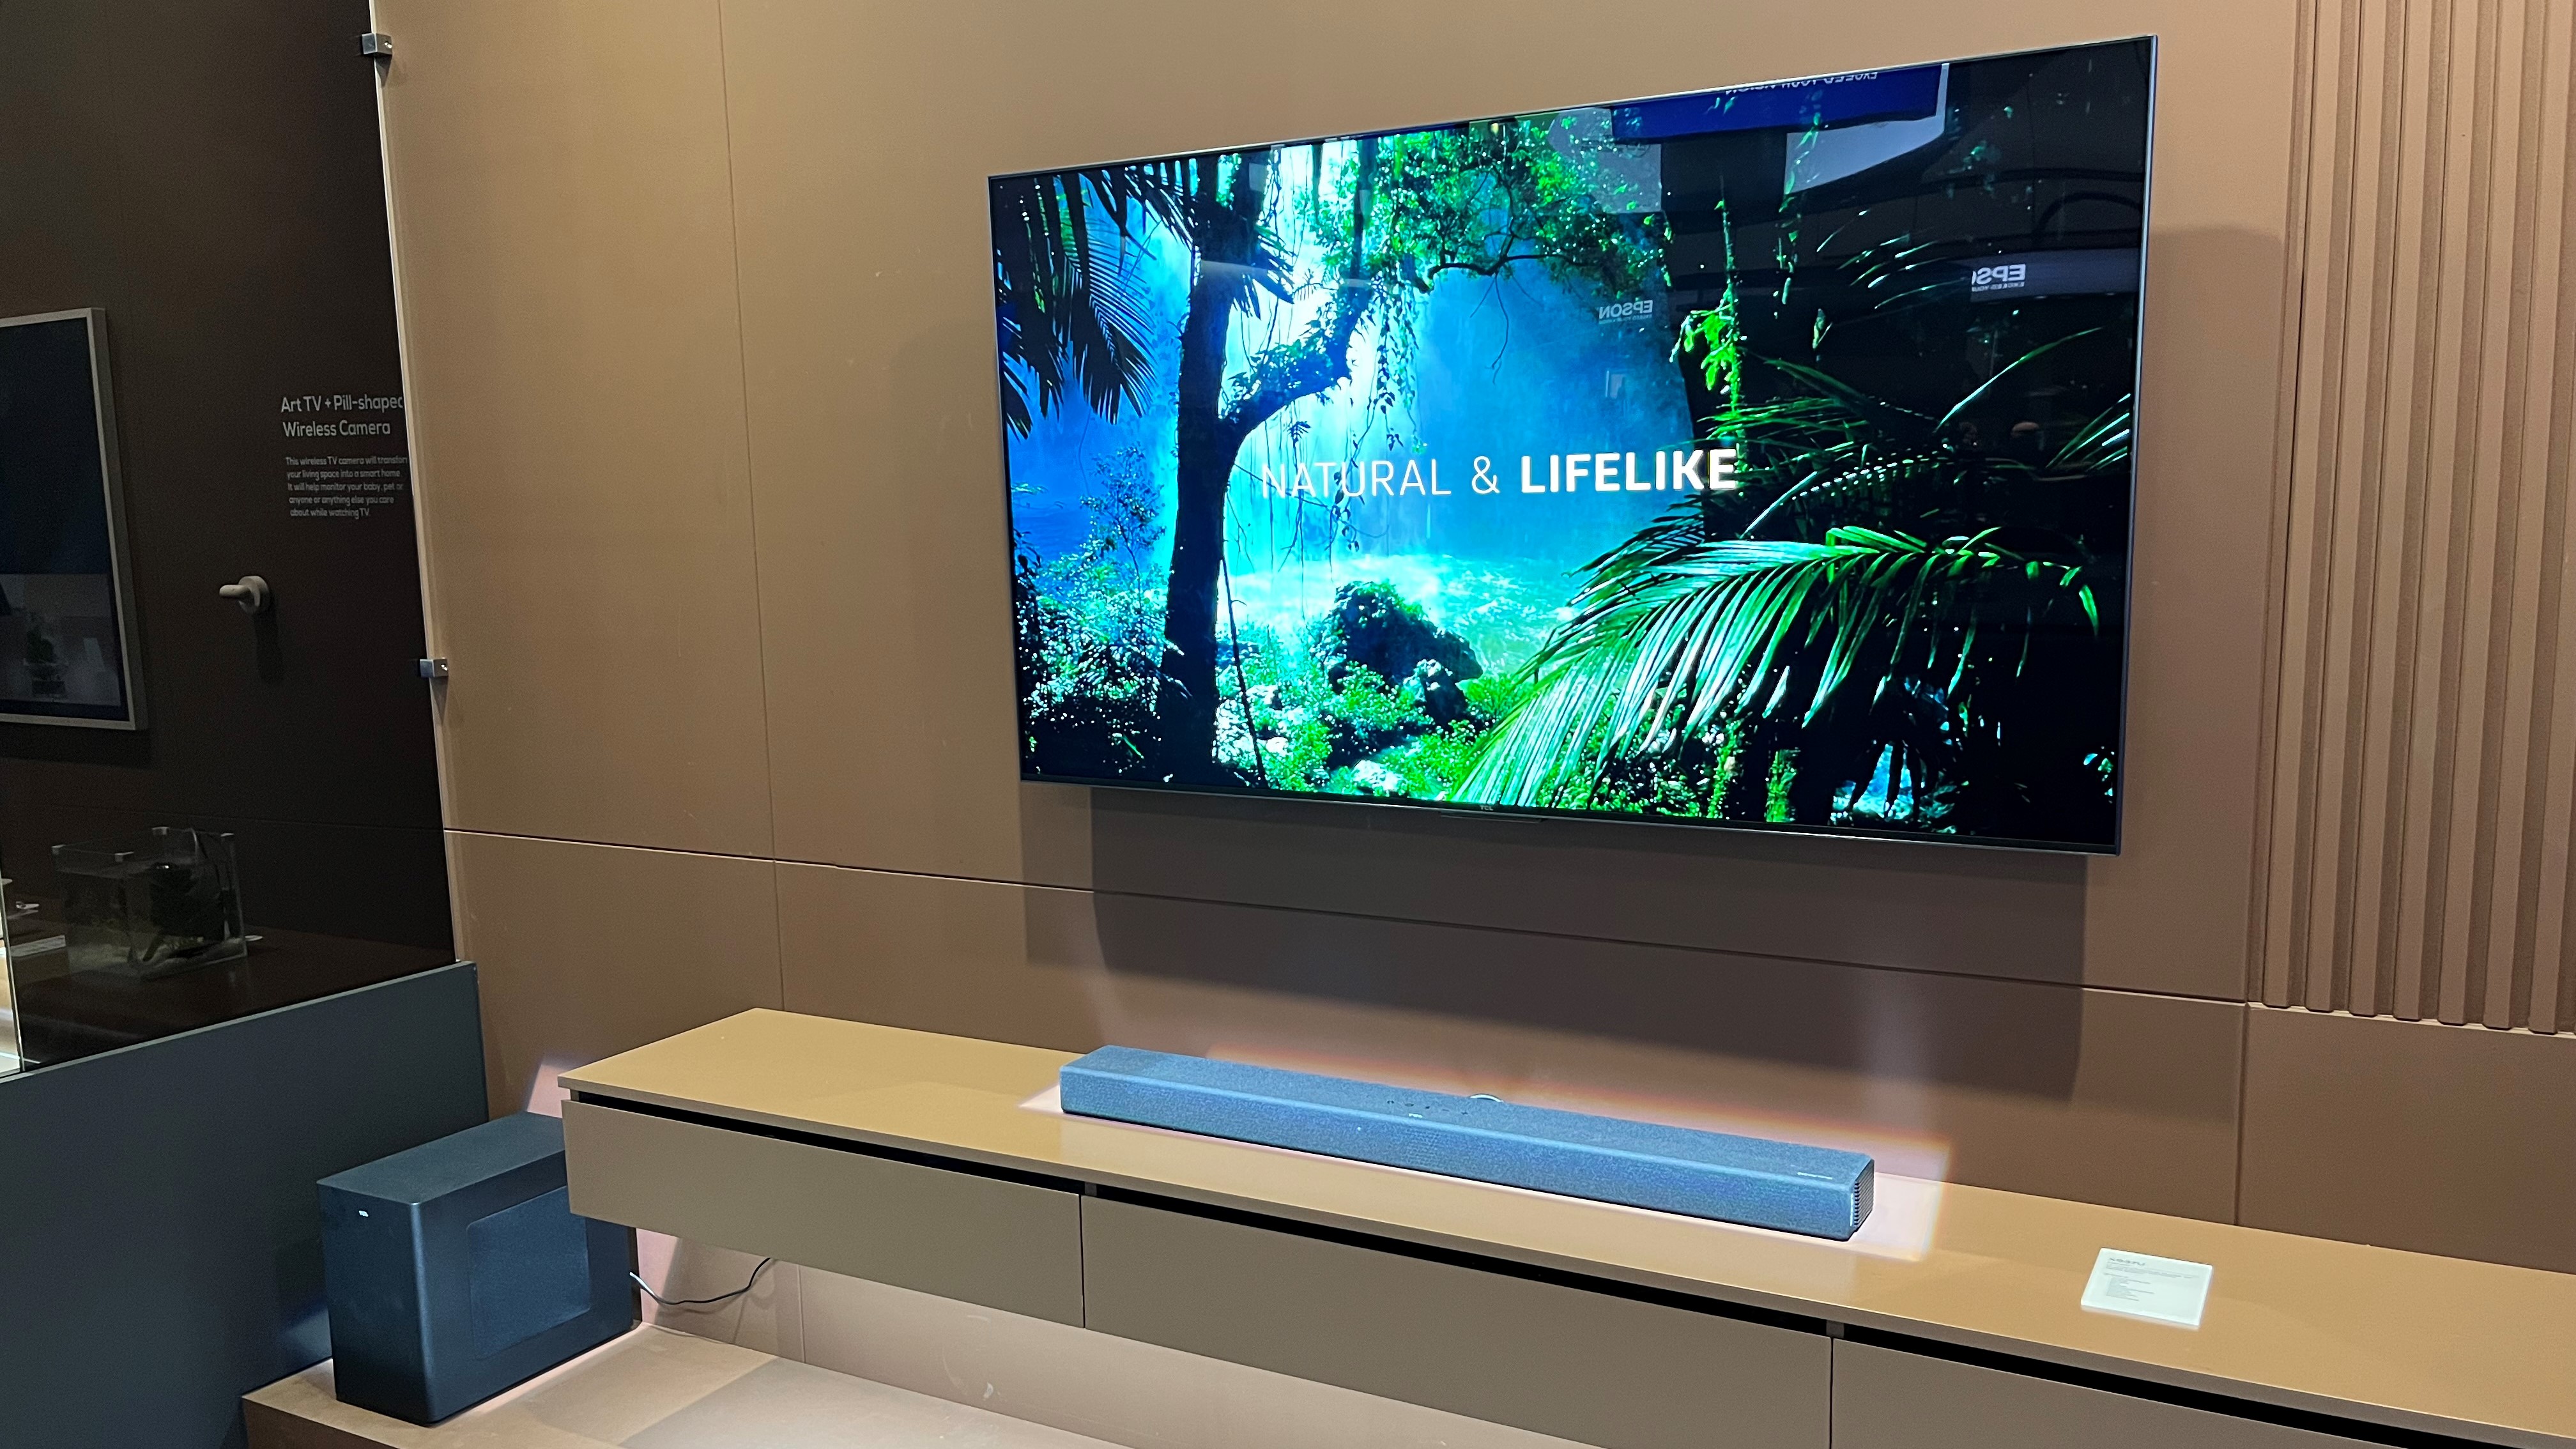 TCL X937U soundbar in trade show booth with TCL TV